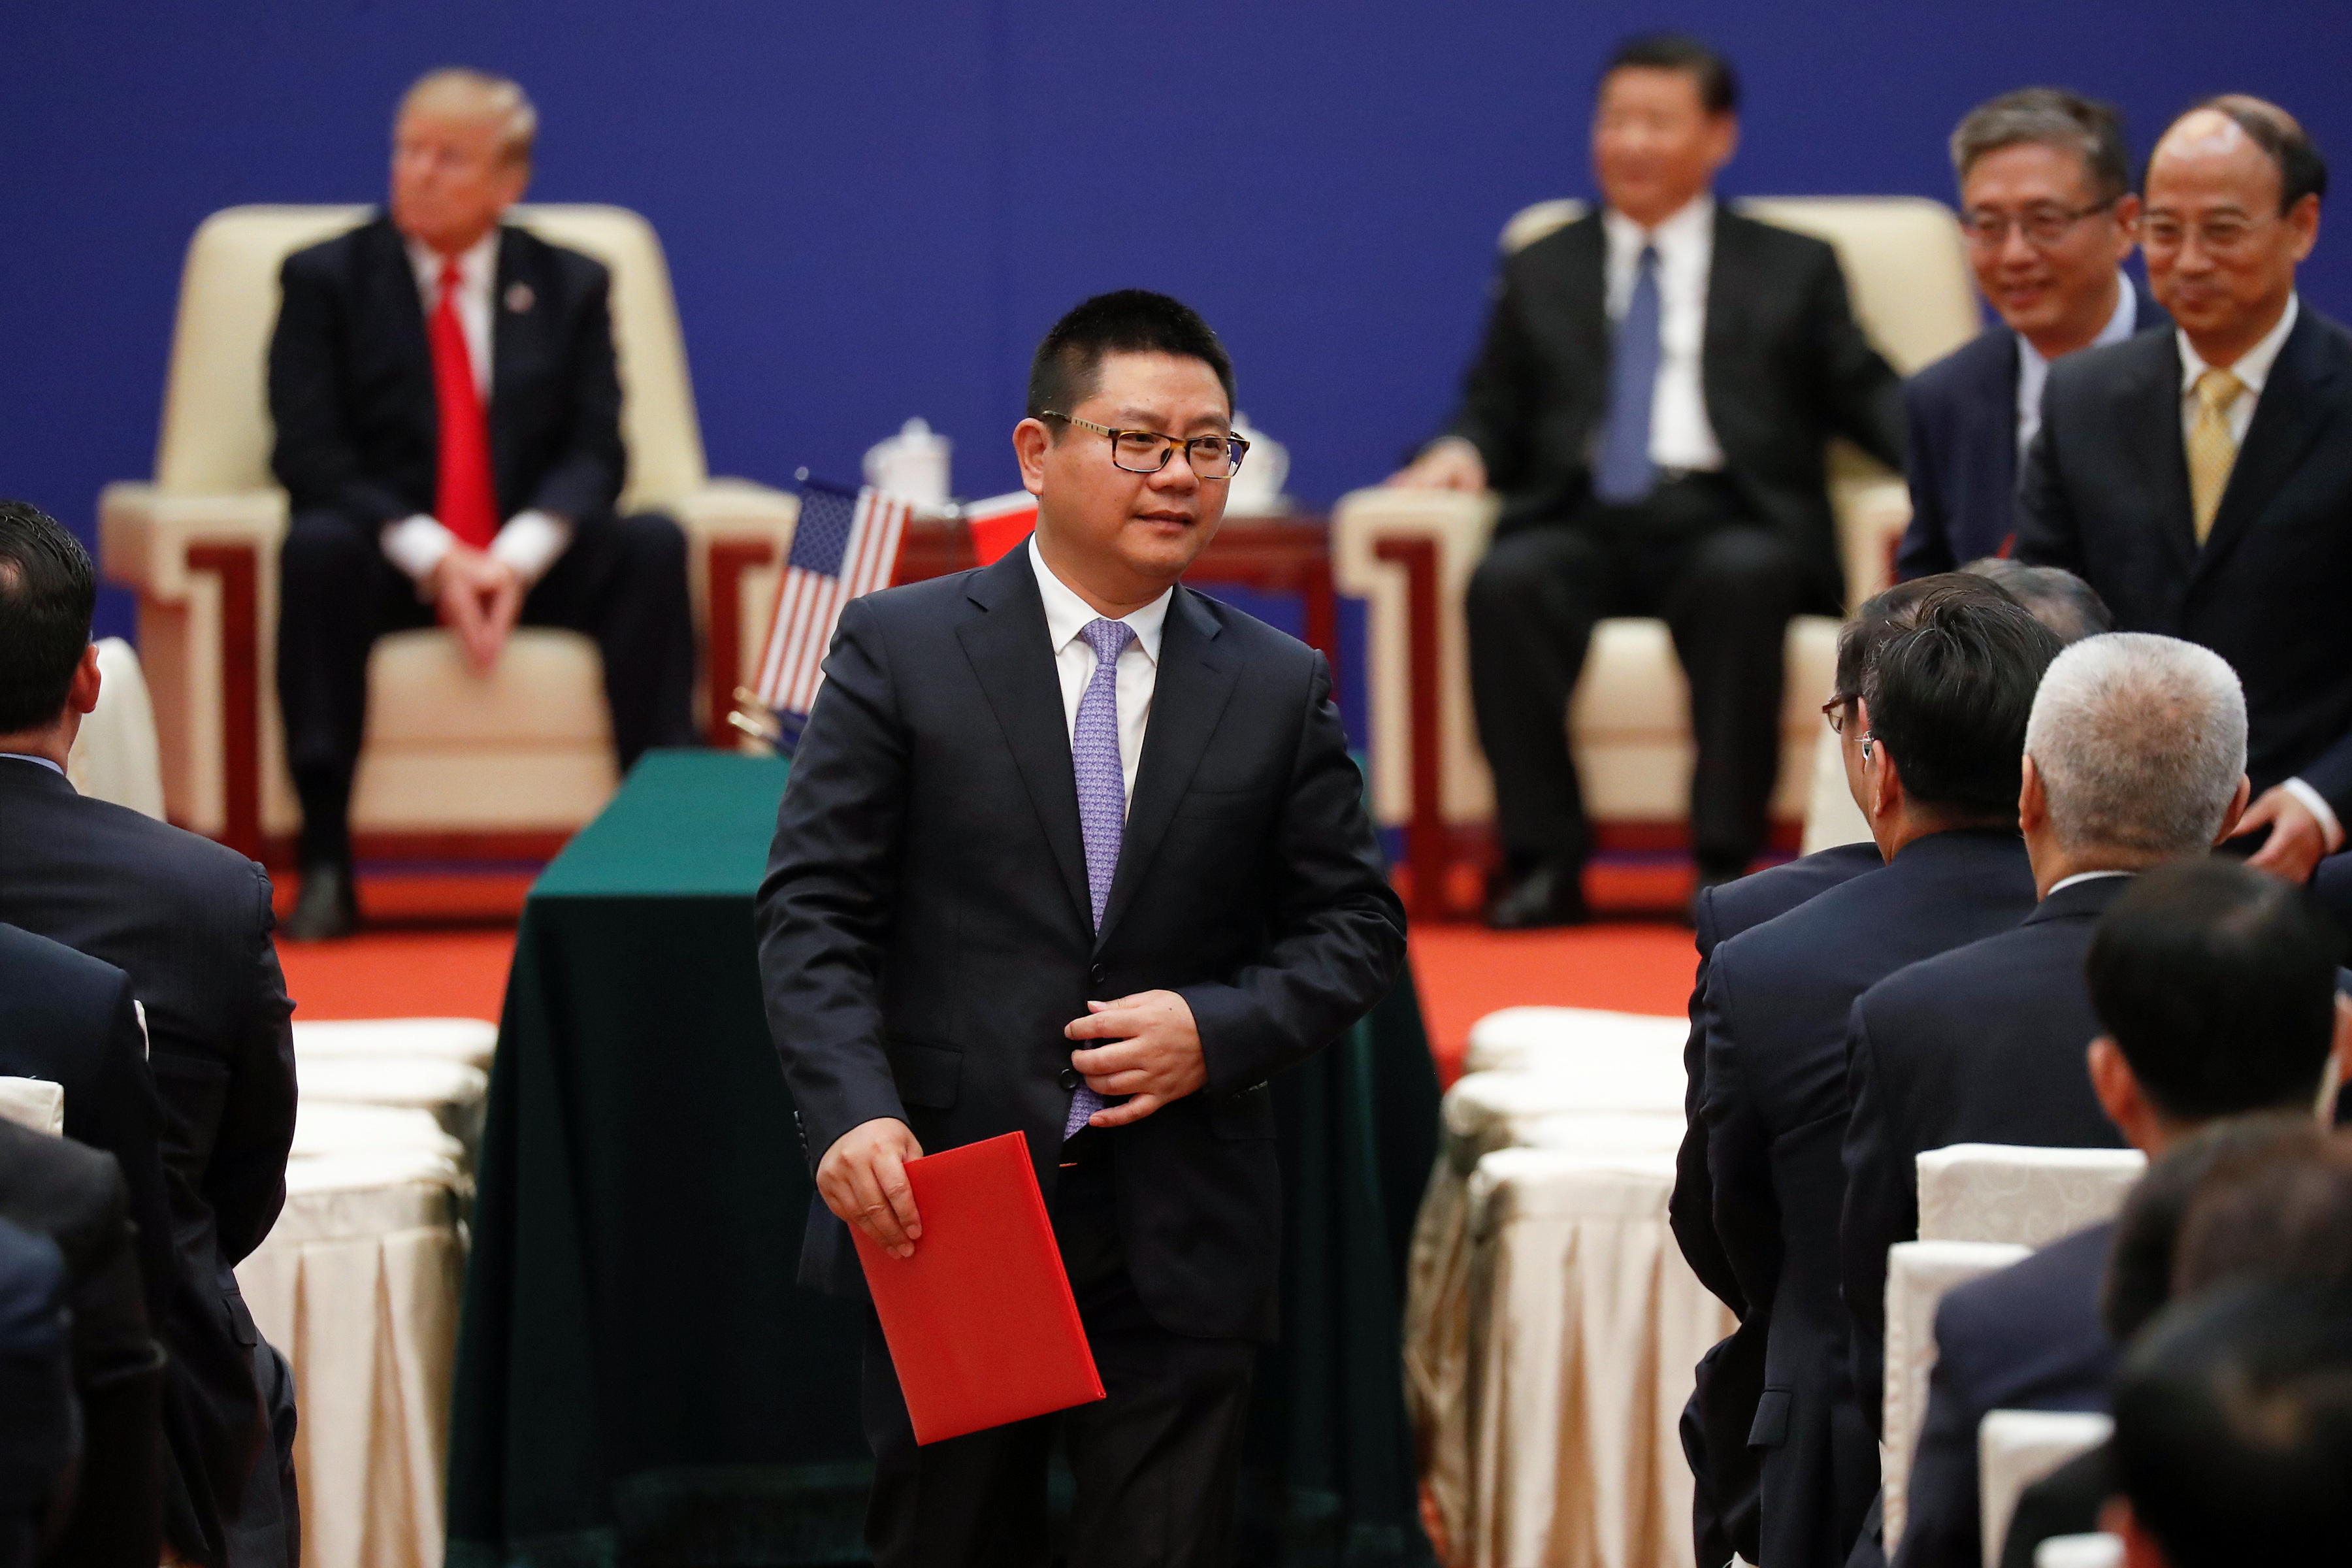 Wang Junjin, chairman of Juneyao, attends signing ceremony and meeting of business leaders with with U.S. President Donald Trump and China's President Xi Jinping at the Great Hall of the People in Beijing